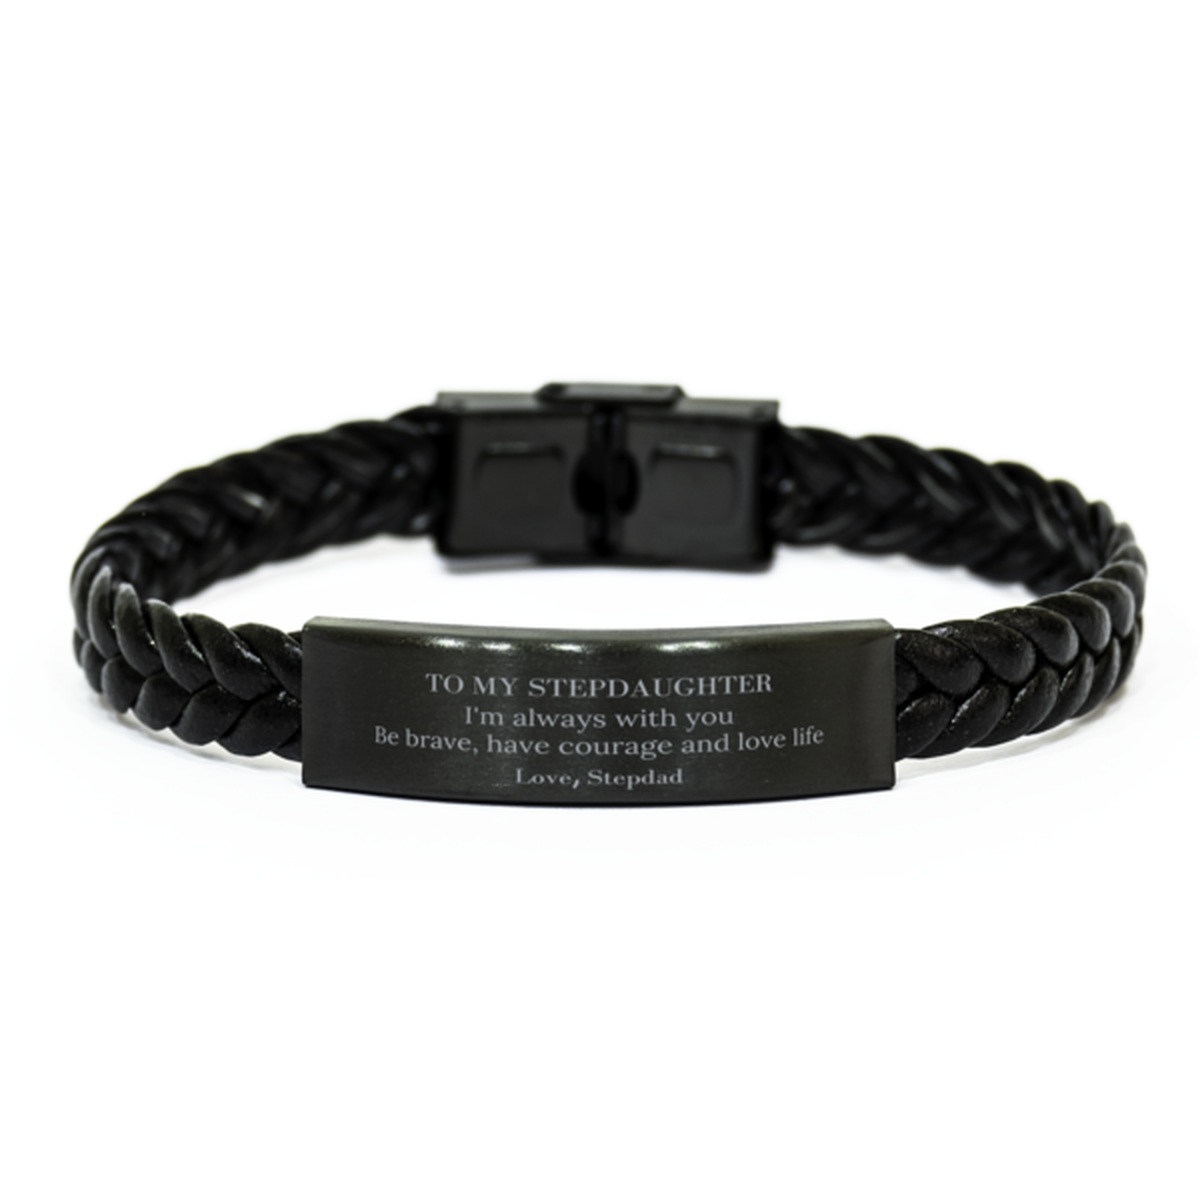 To My Stepdaughter Gifts from Stepdad, Unique Braided Leather Bracelet Inspirational Christmas Birthday Graduation Gifts for Stepdaughter I'm always with you. Be brave, have courage and love life. Love, Stepdad